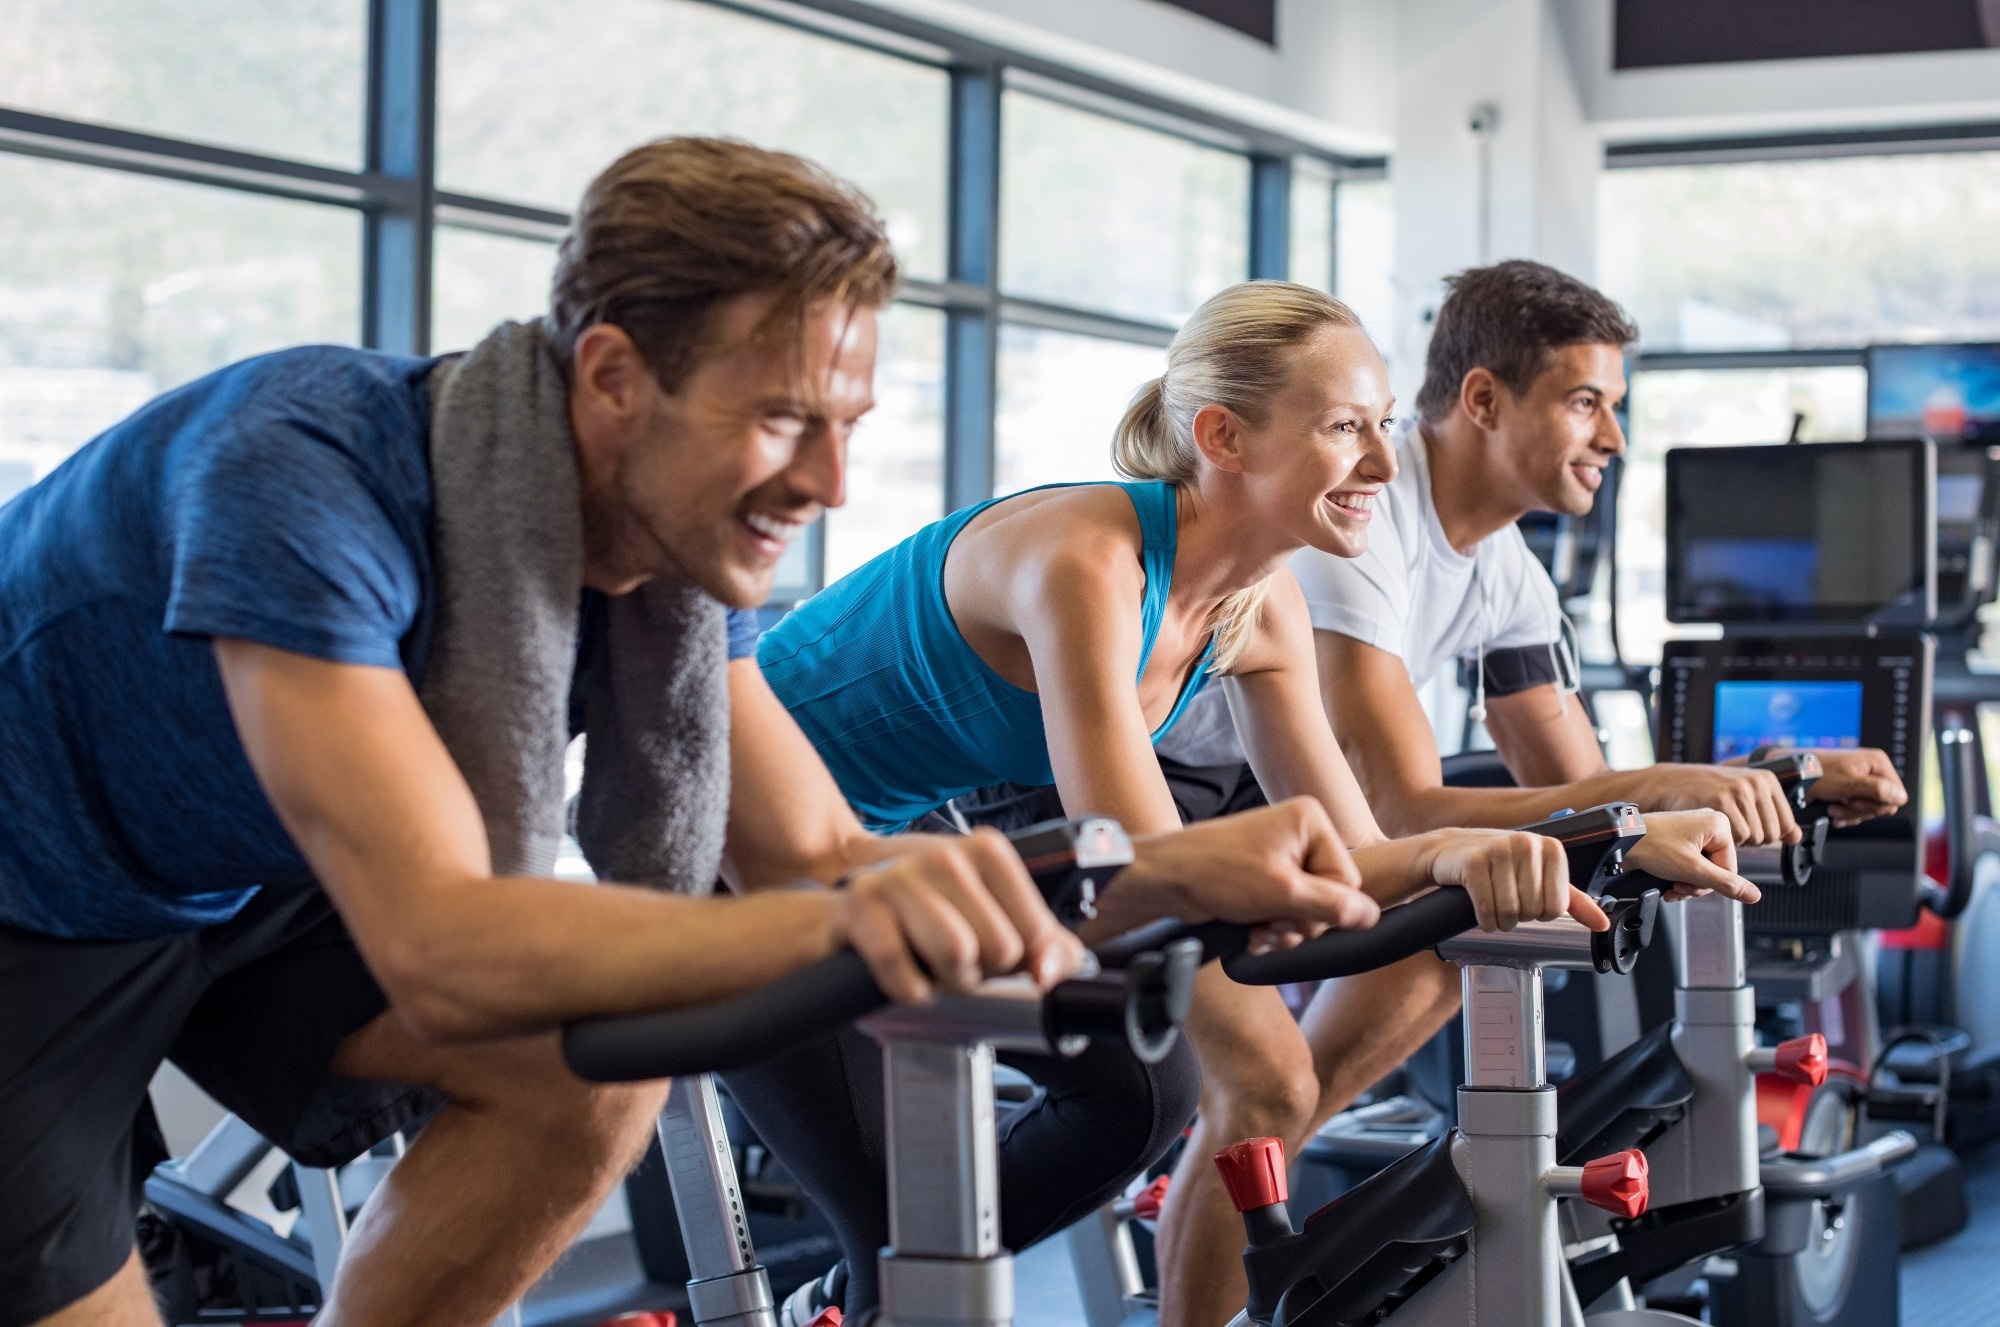 Study: Exercise Training Reduces the Inflammatory Response and Promotes Intestinal Mucosa-associated Immunity in Lynch Syndrome. Image Credit: Ground Picture / Shutterstock.com